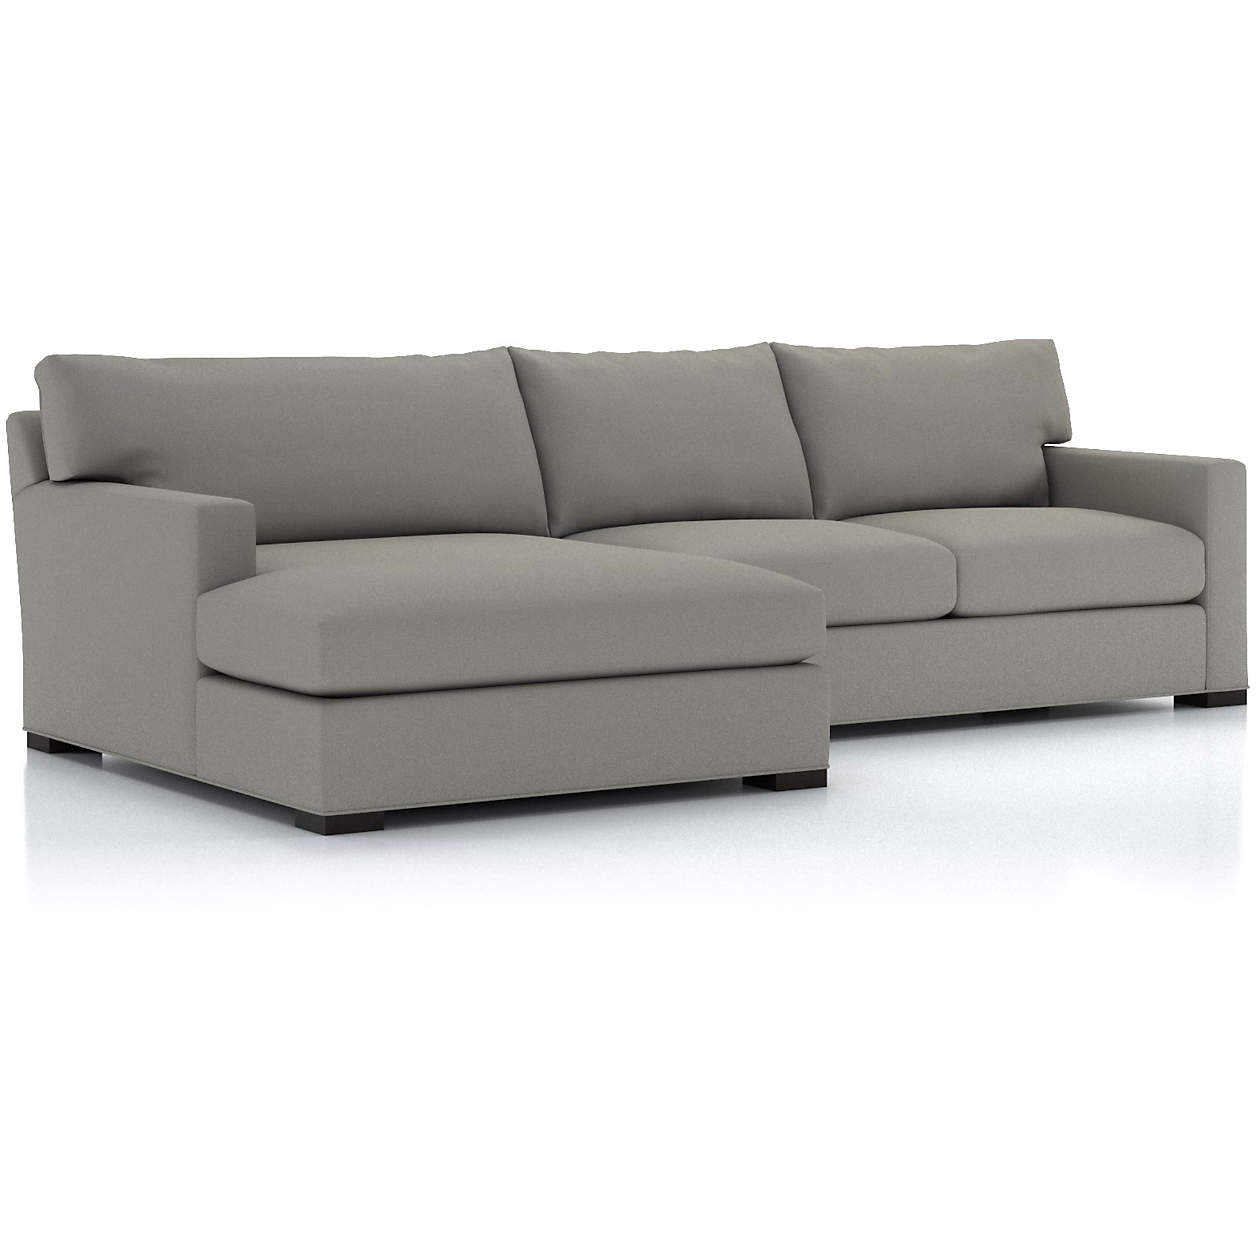 Axis II 2-Piece Left Arm Double Chaise Sectional Sofa - Image 0